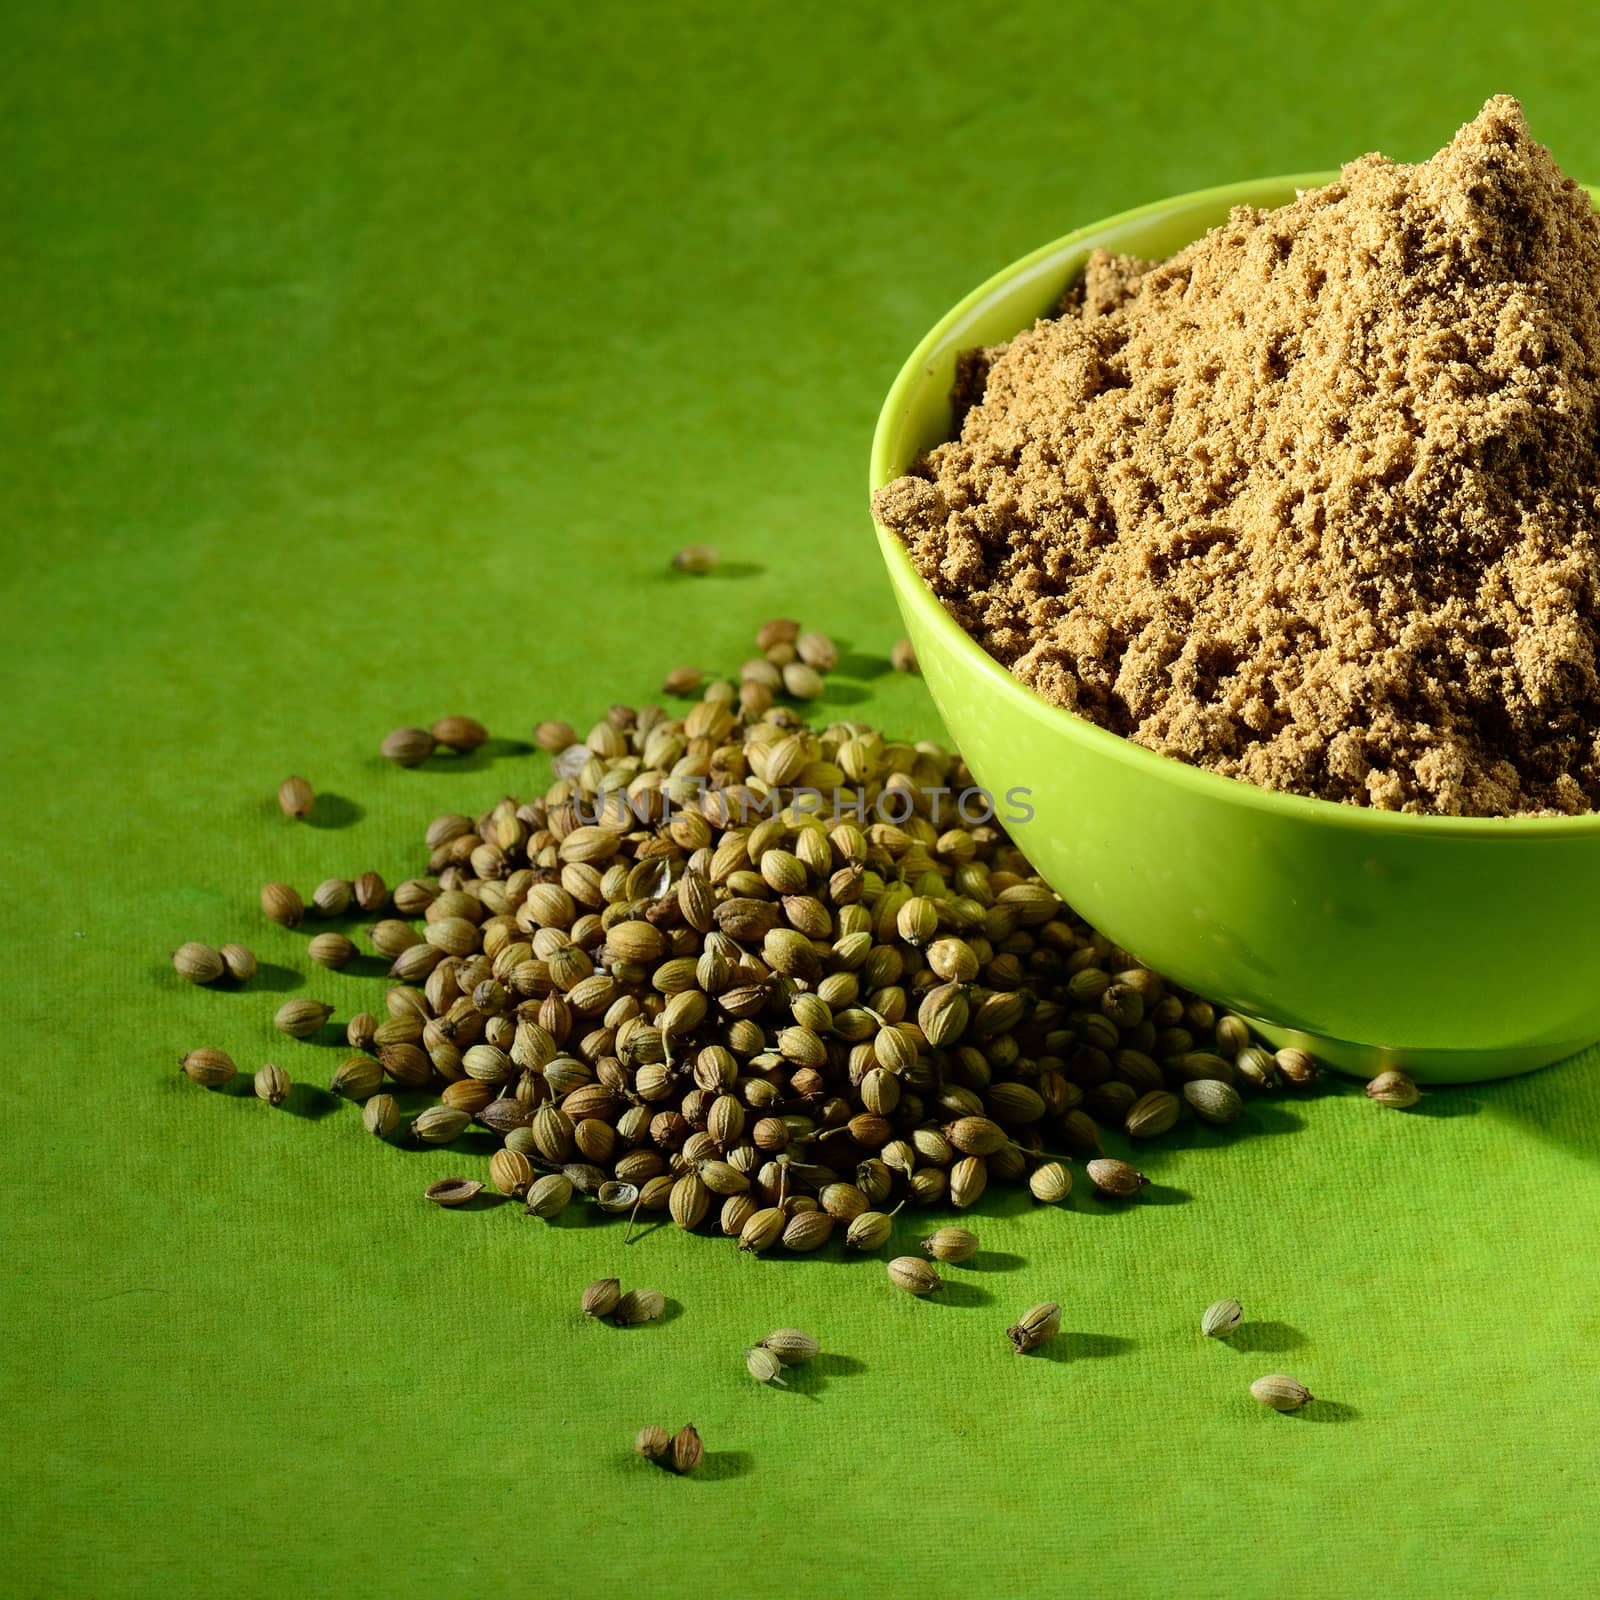 Coriander seeds and Powdered coriander in green container on green background